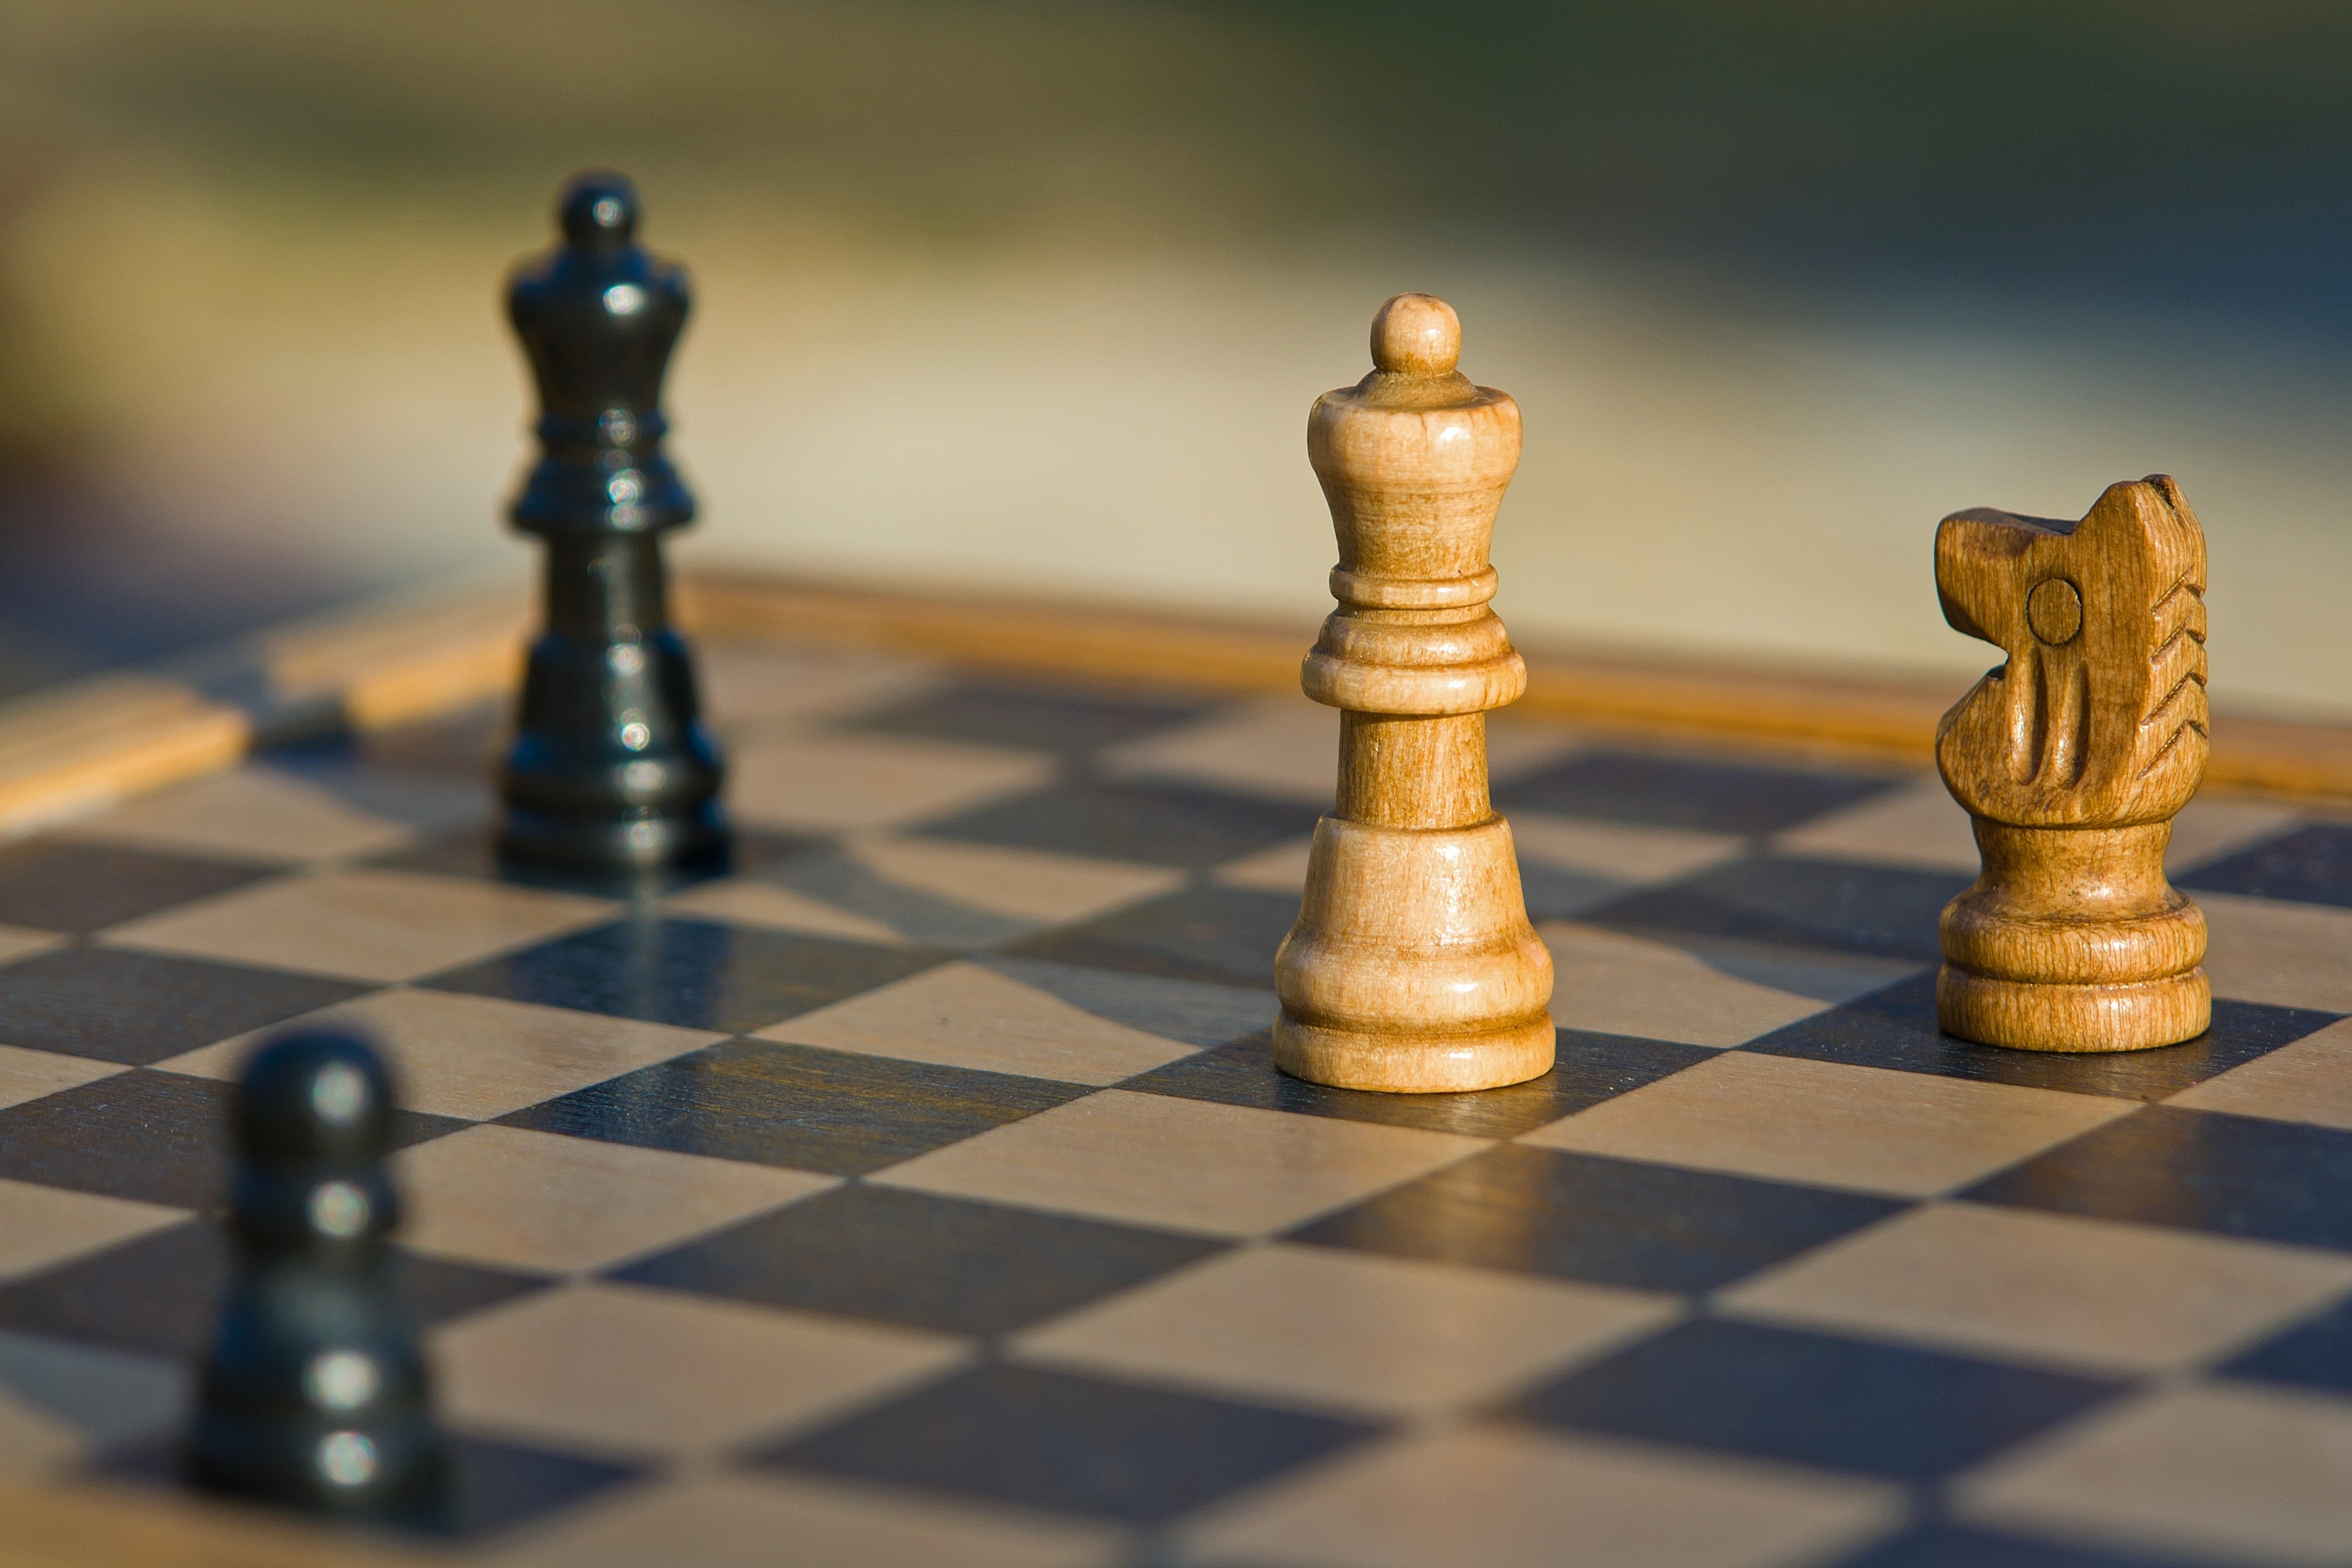 Chess Explained: The Classical Sicilian